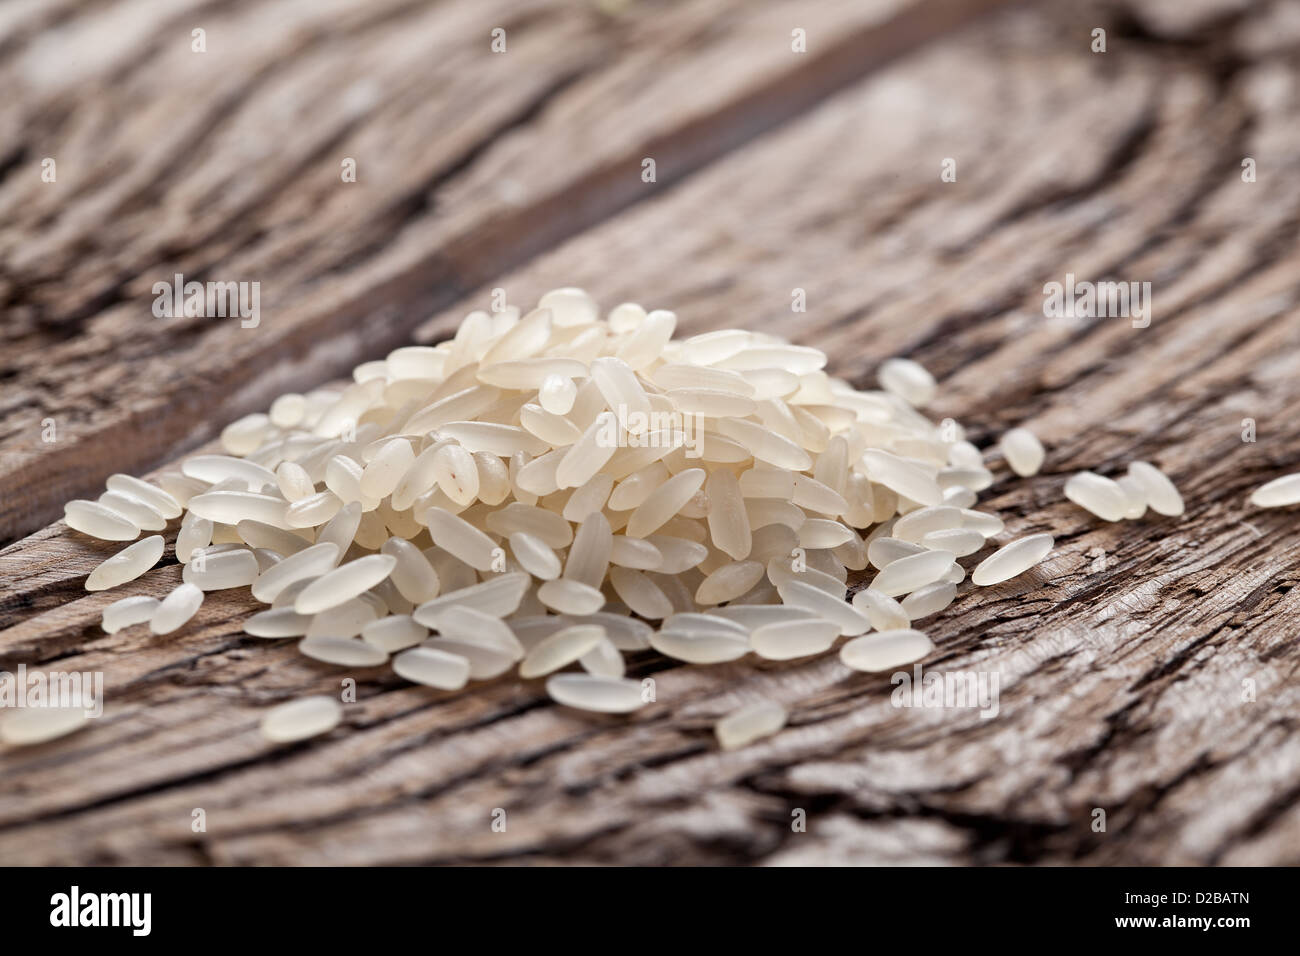 Handful of rice on a wooden table. Stock Photo